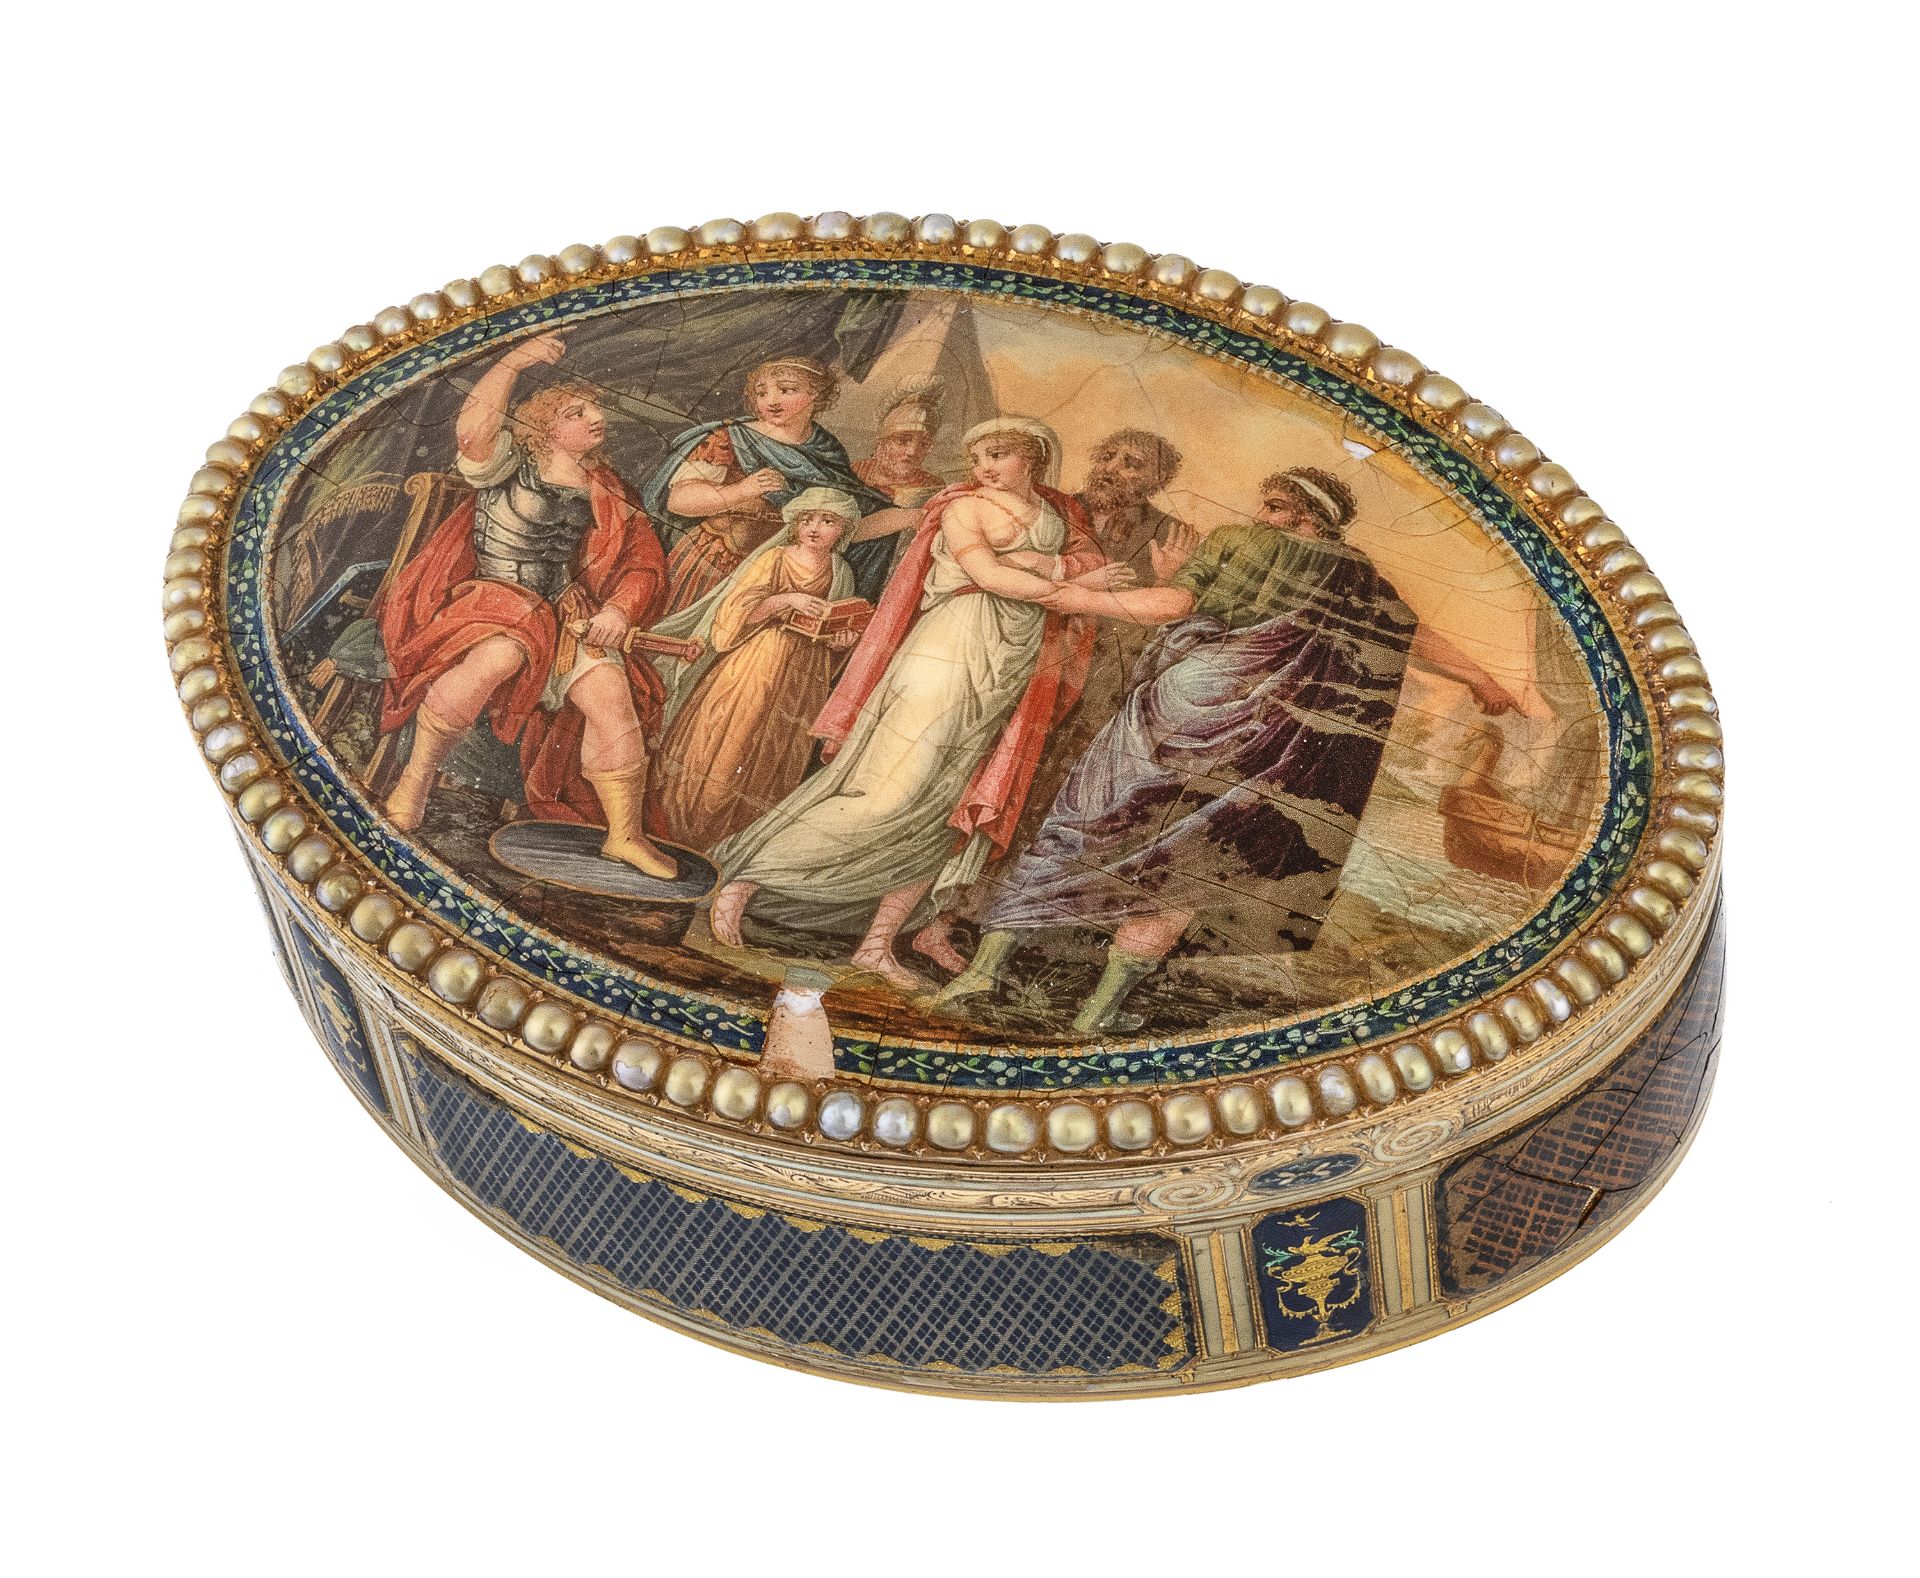 GOLD AND ENAMEL BOX PROBABLY FRANCE EARLY 20TH CENTURY